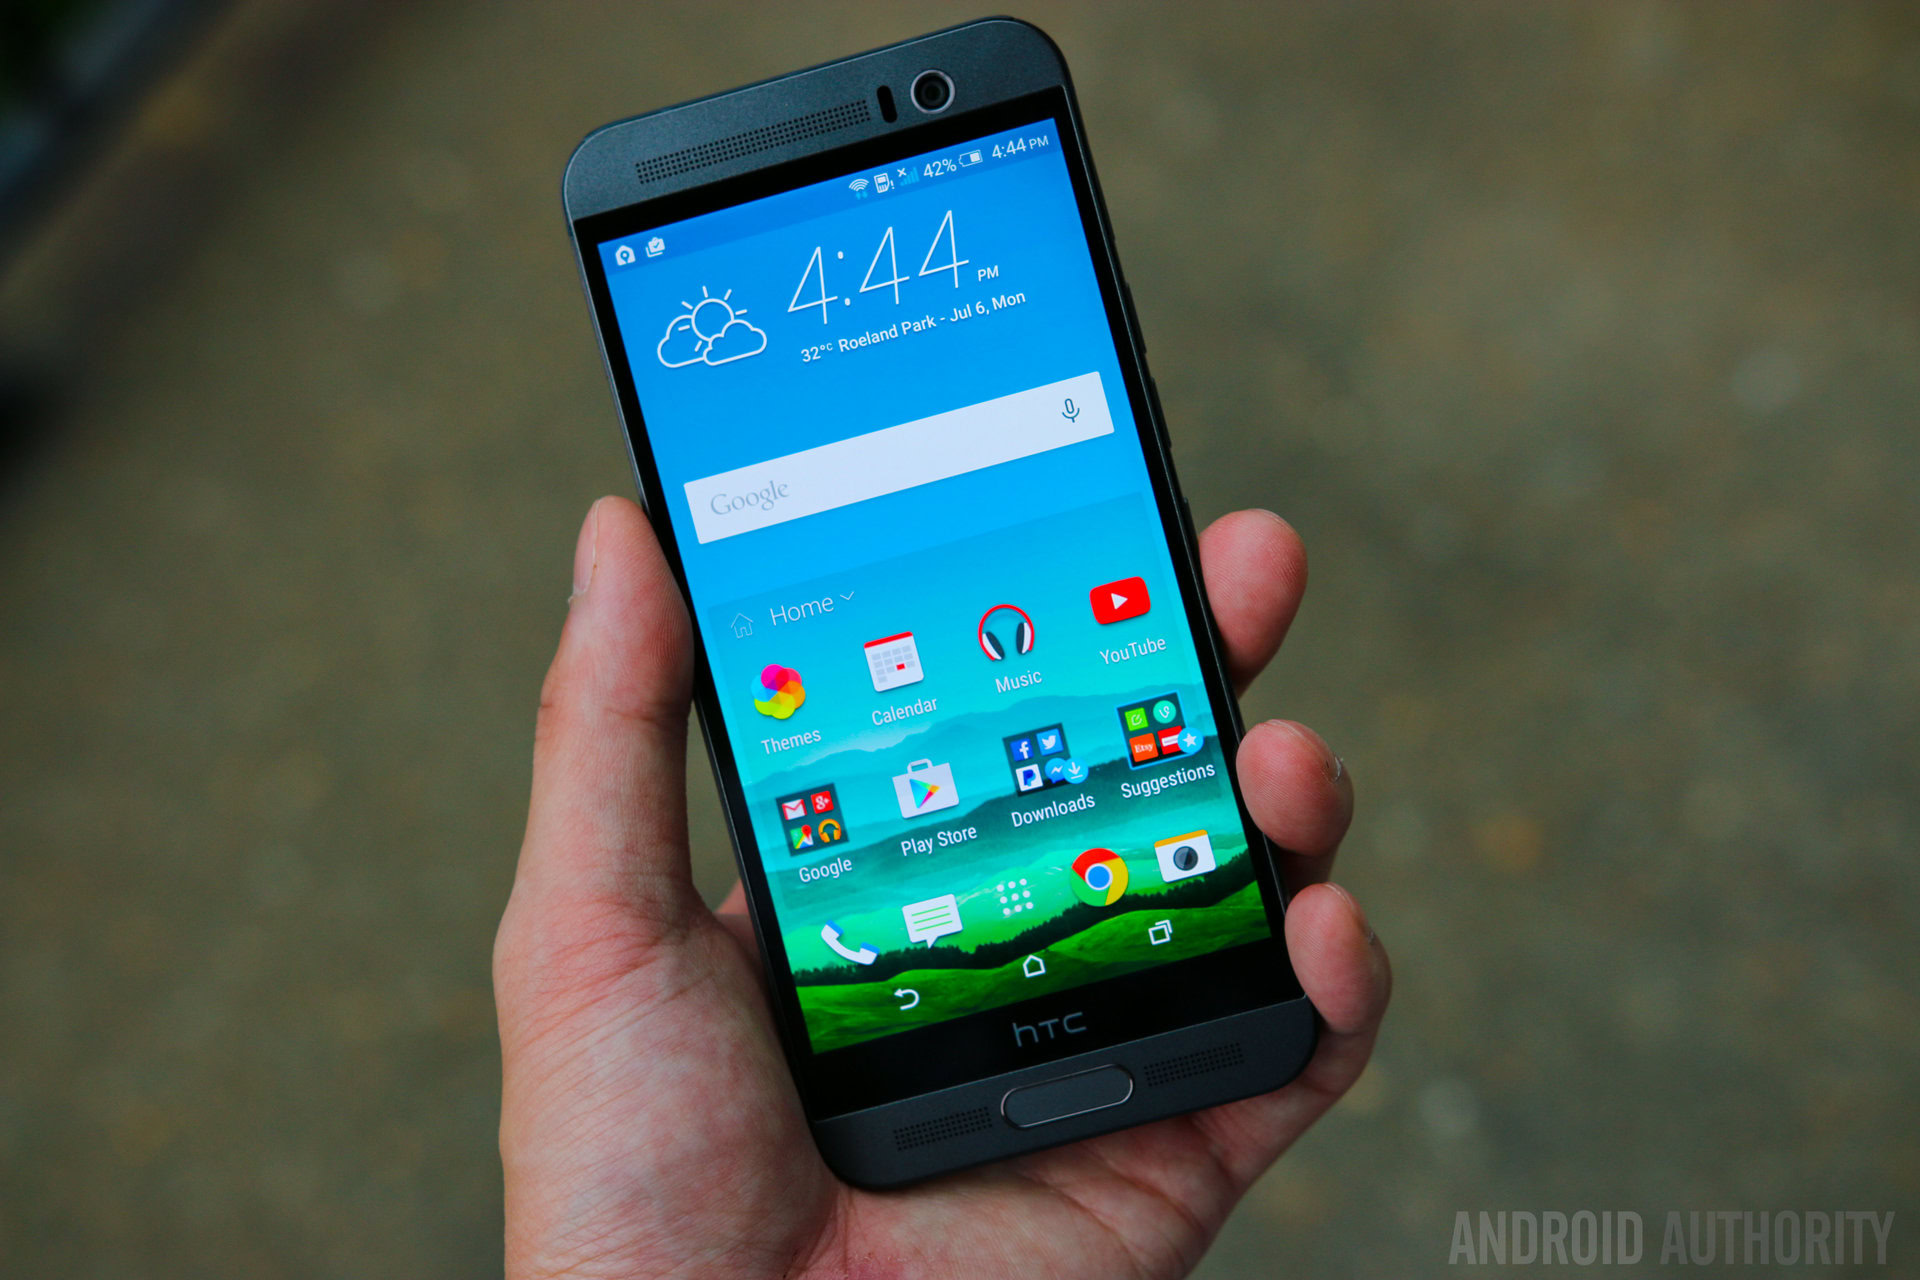 muur Kostuums Madeliefje HTC One M9+ review: improvements over the M9, but with a major drawback